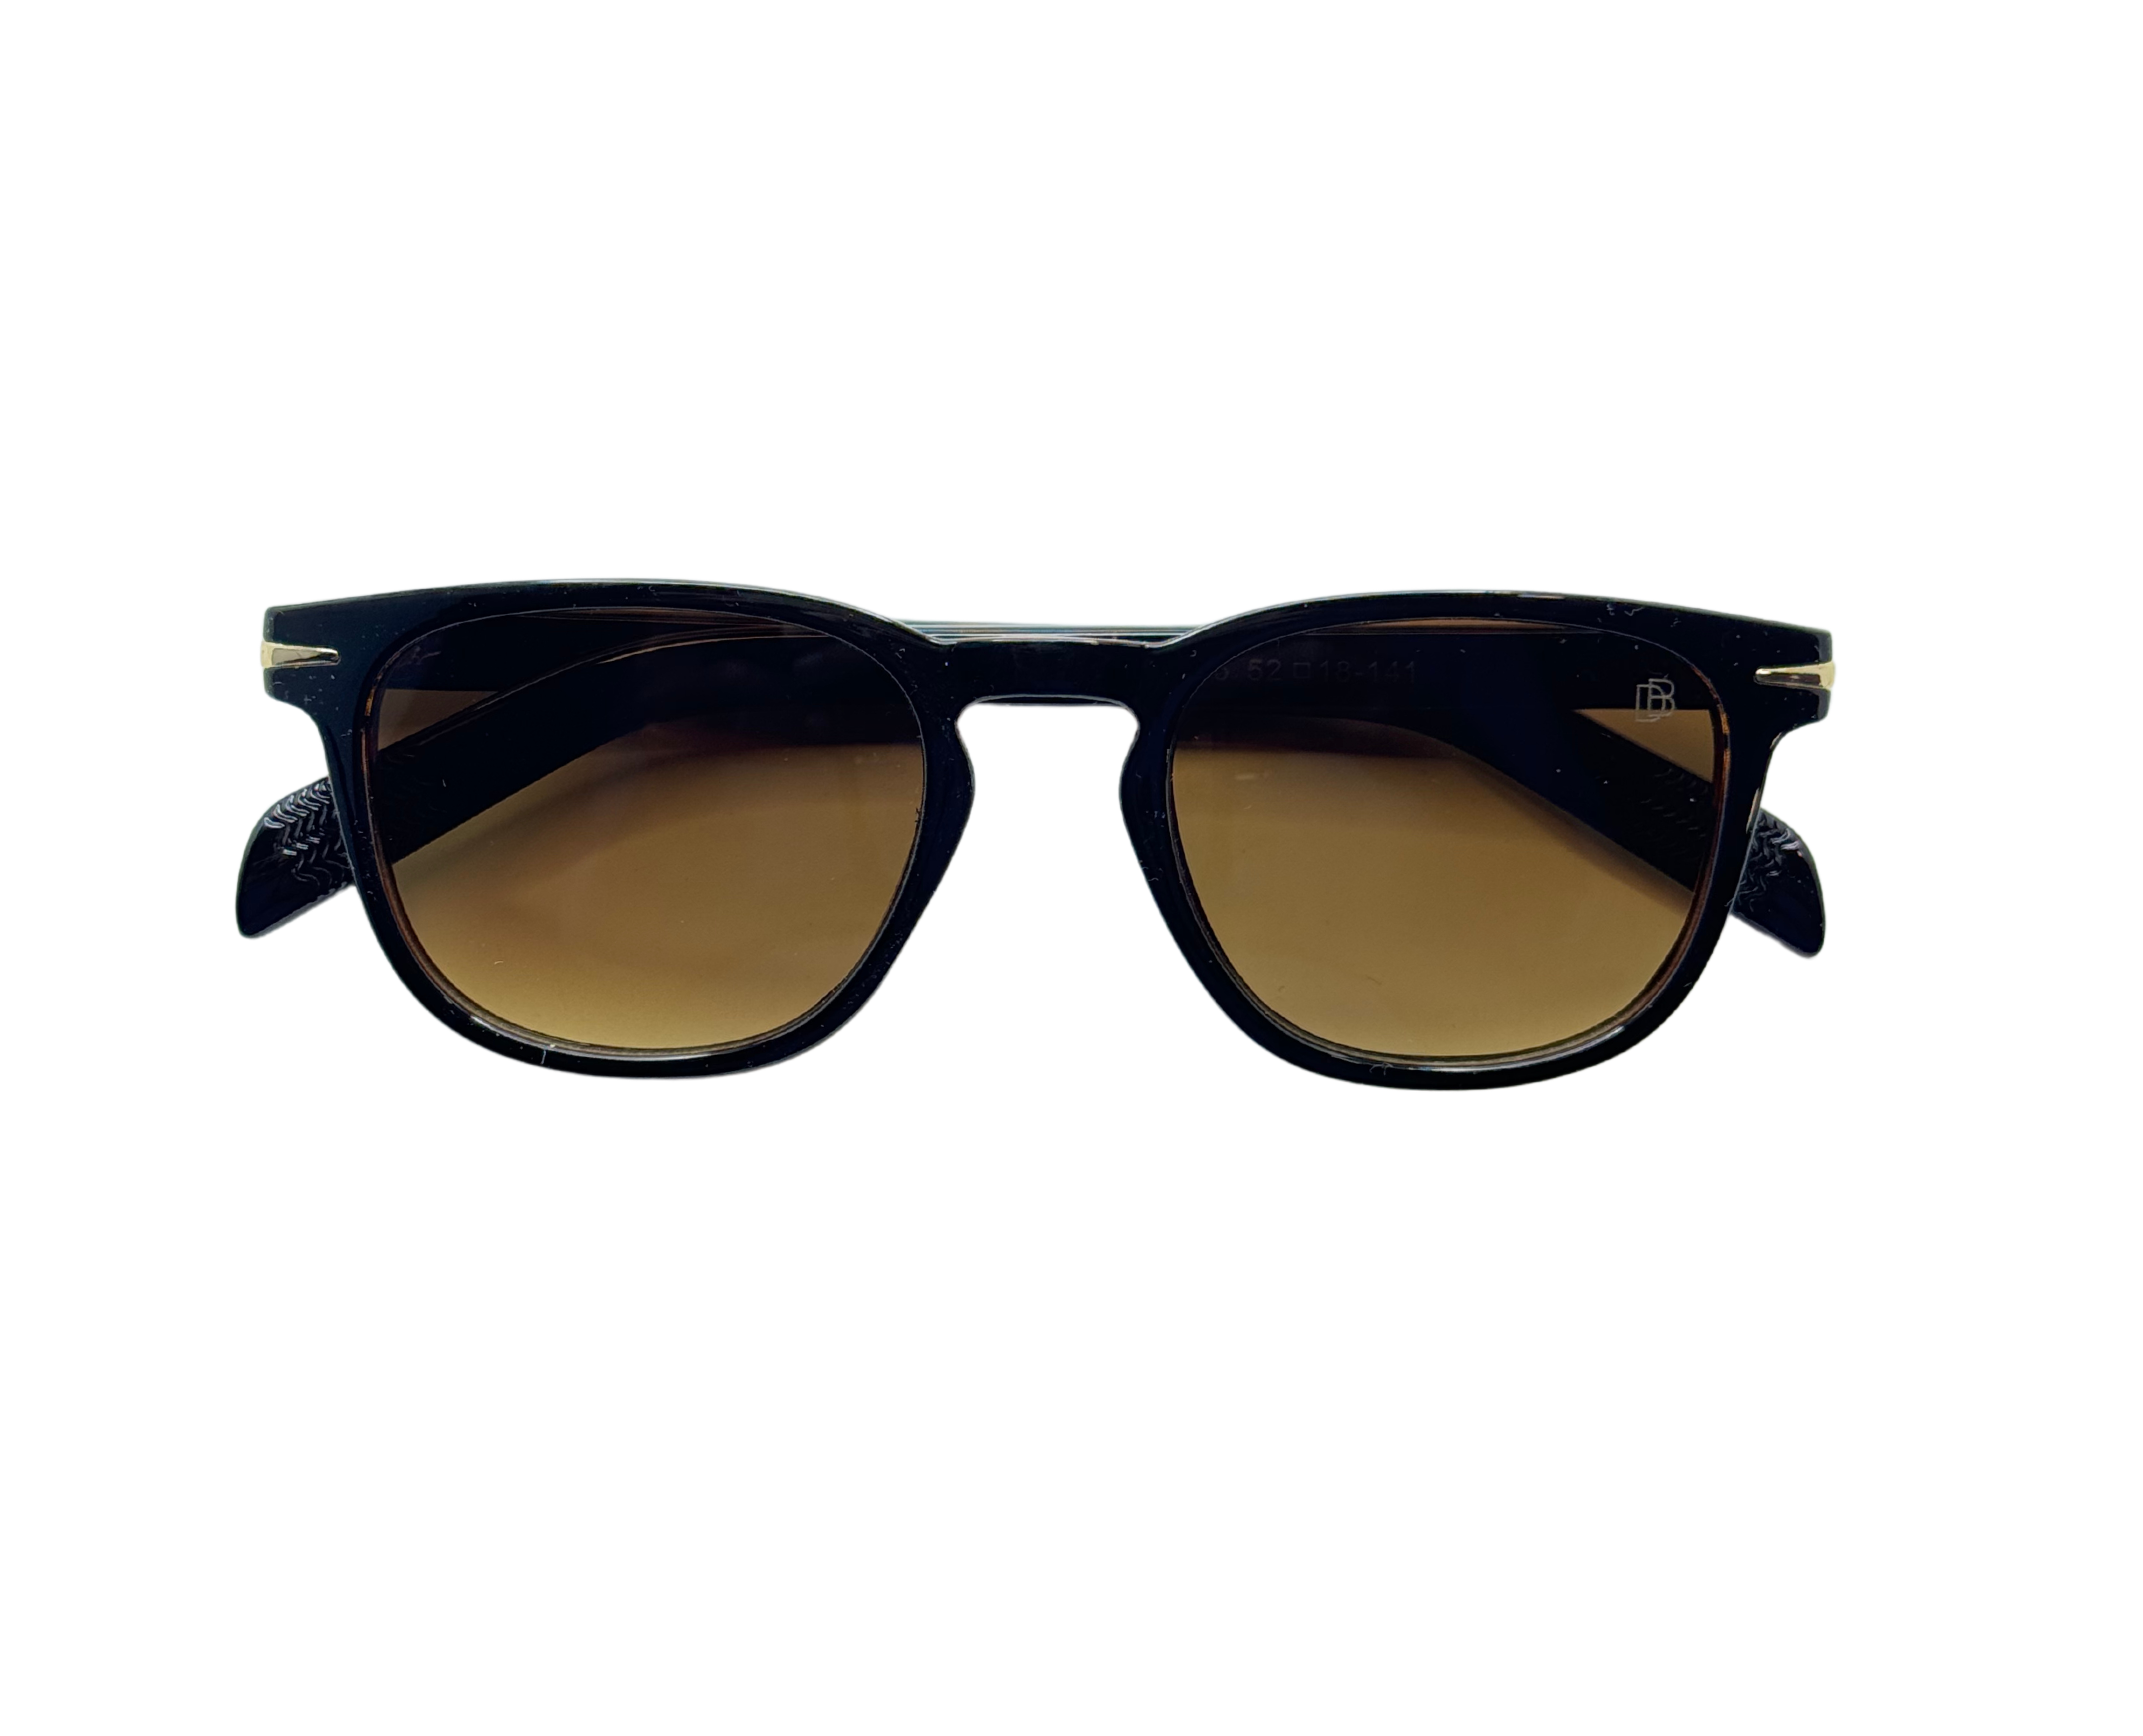 NS Deluxe - 7086 - Black/Brown- Sunglasses